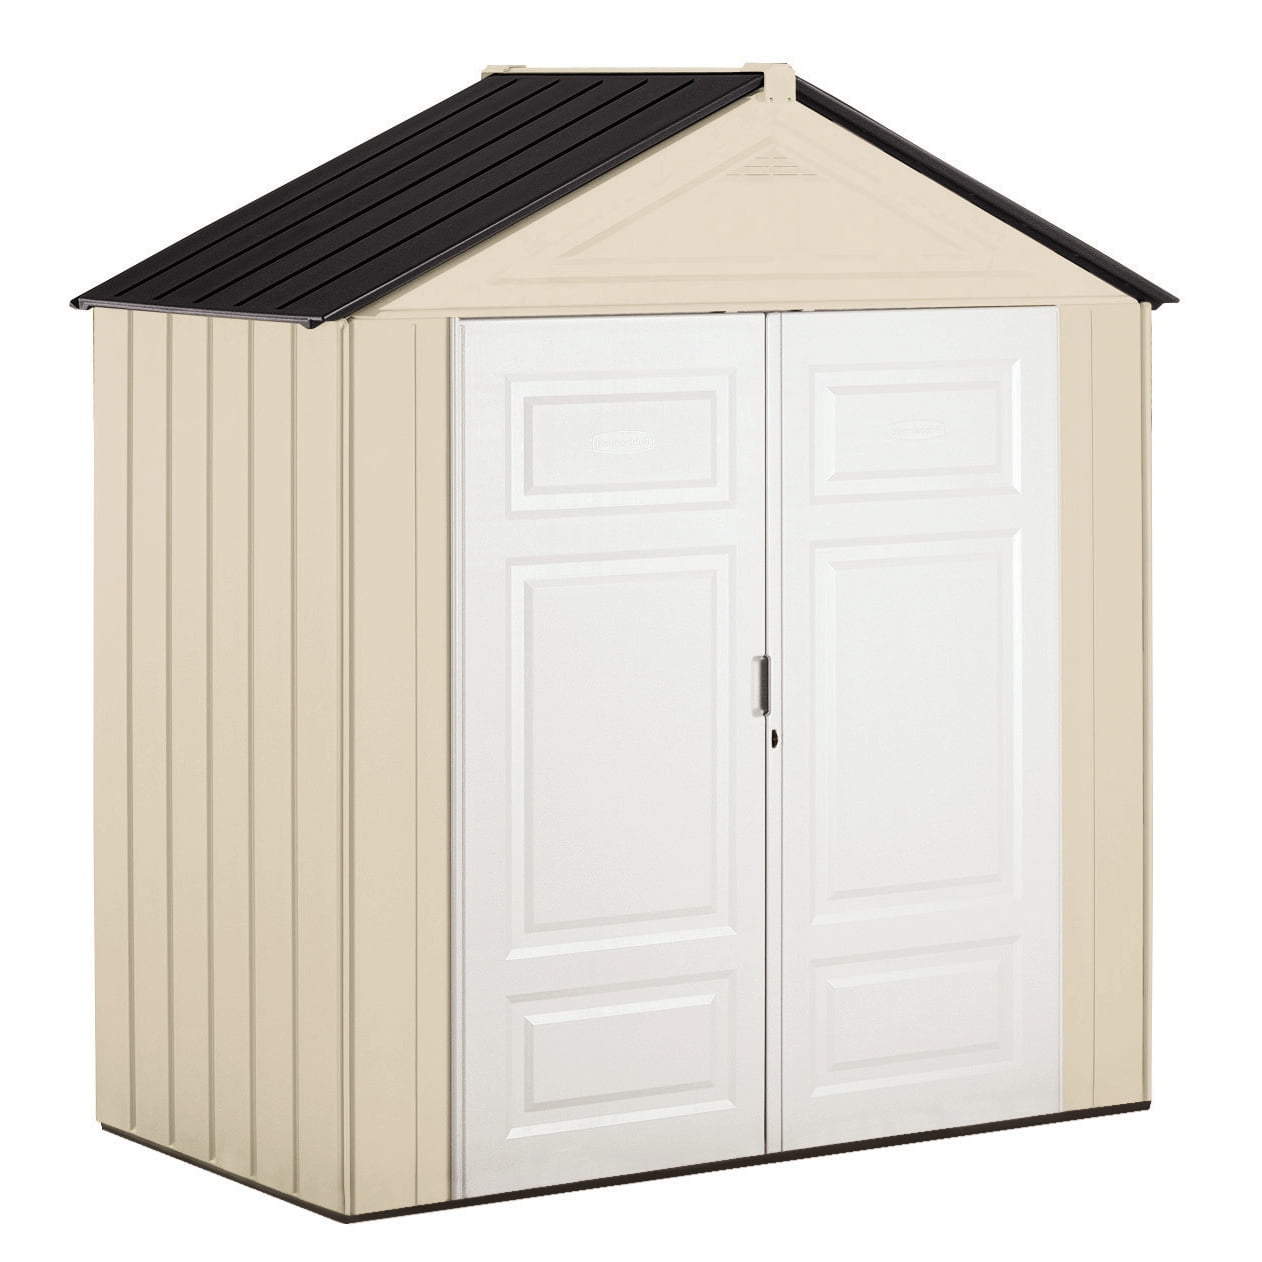 Rubbermaid 3 x 7 ft Resin St   orage Shed, Sandstone &amp; Onyx 